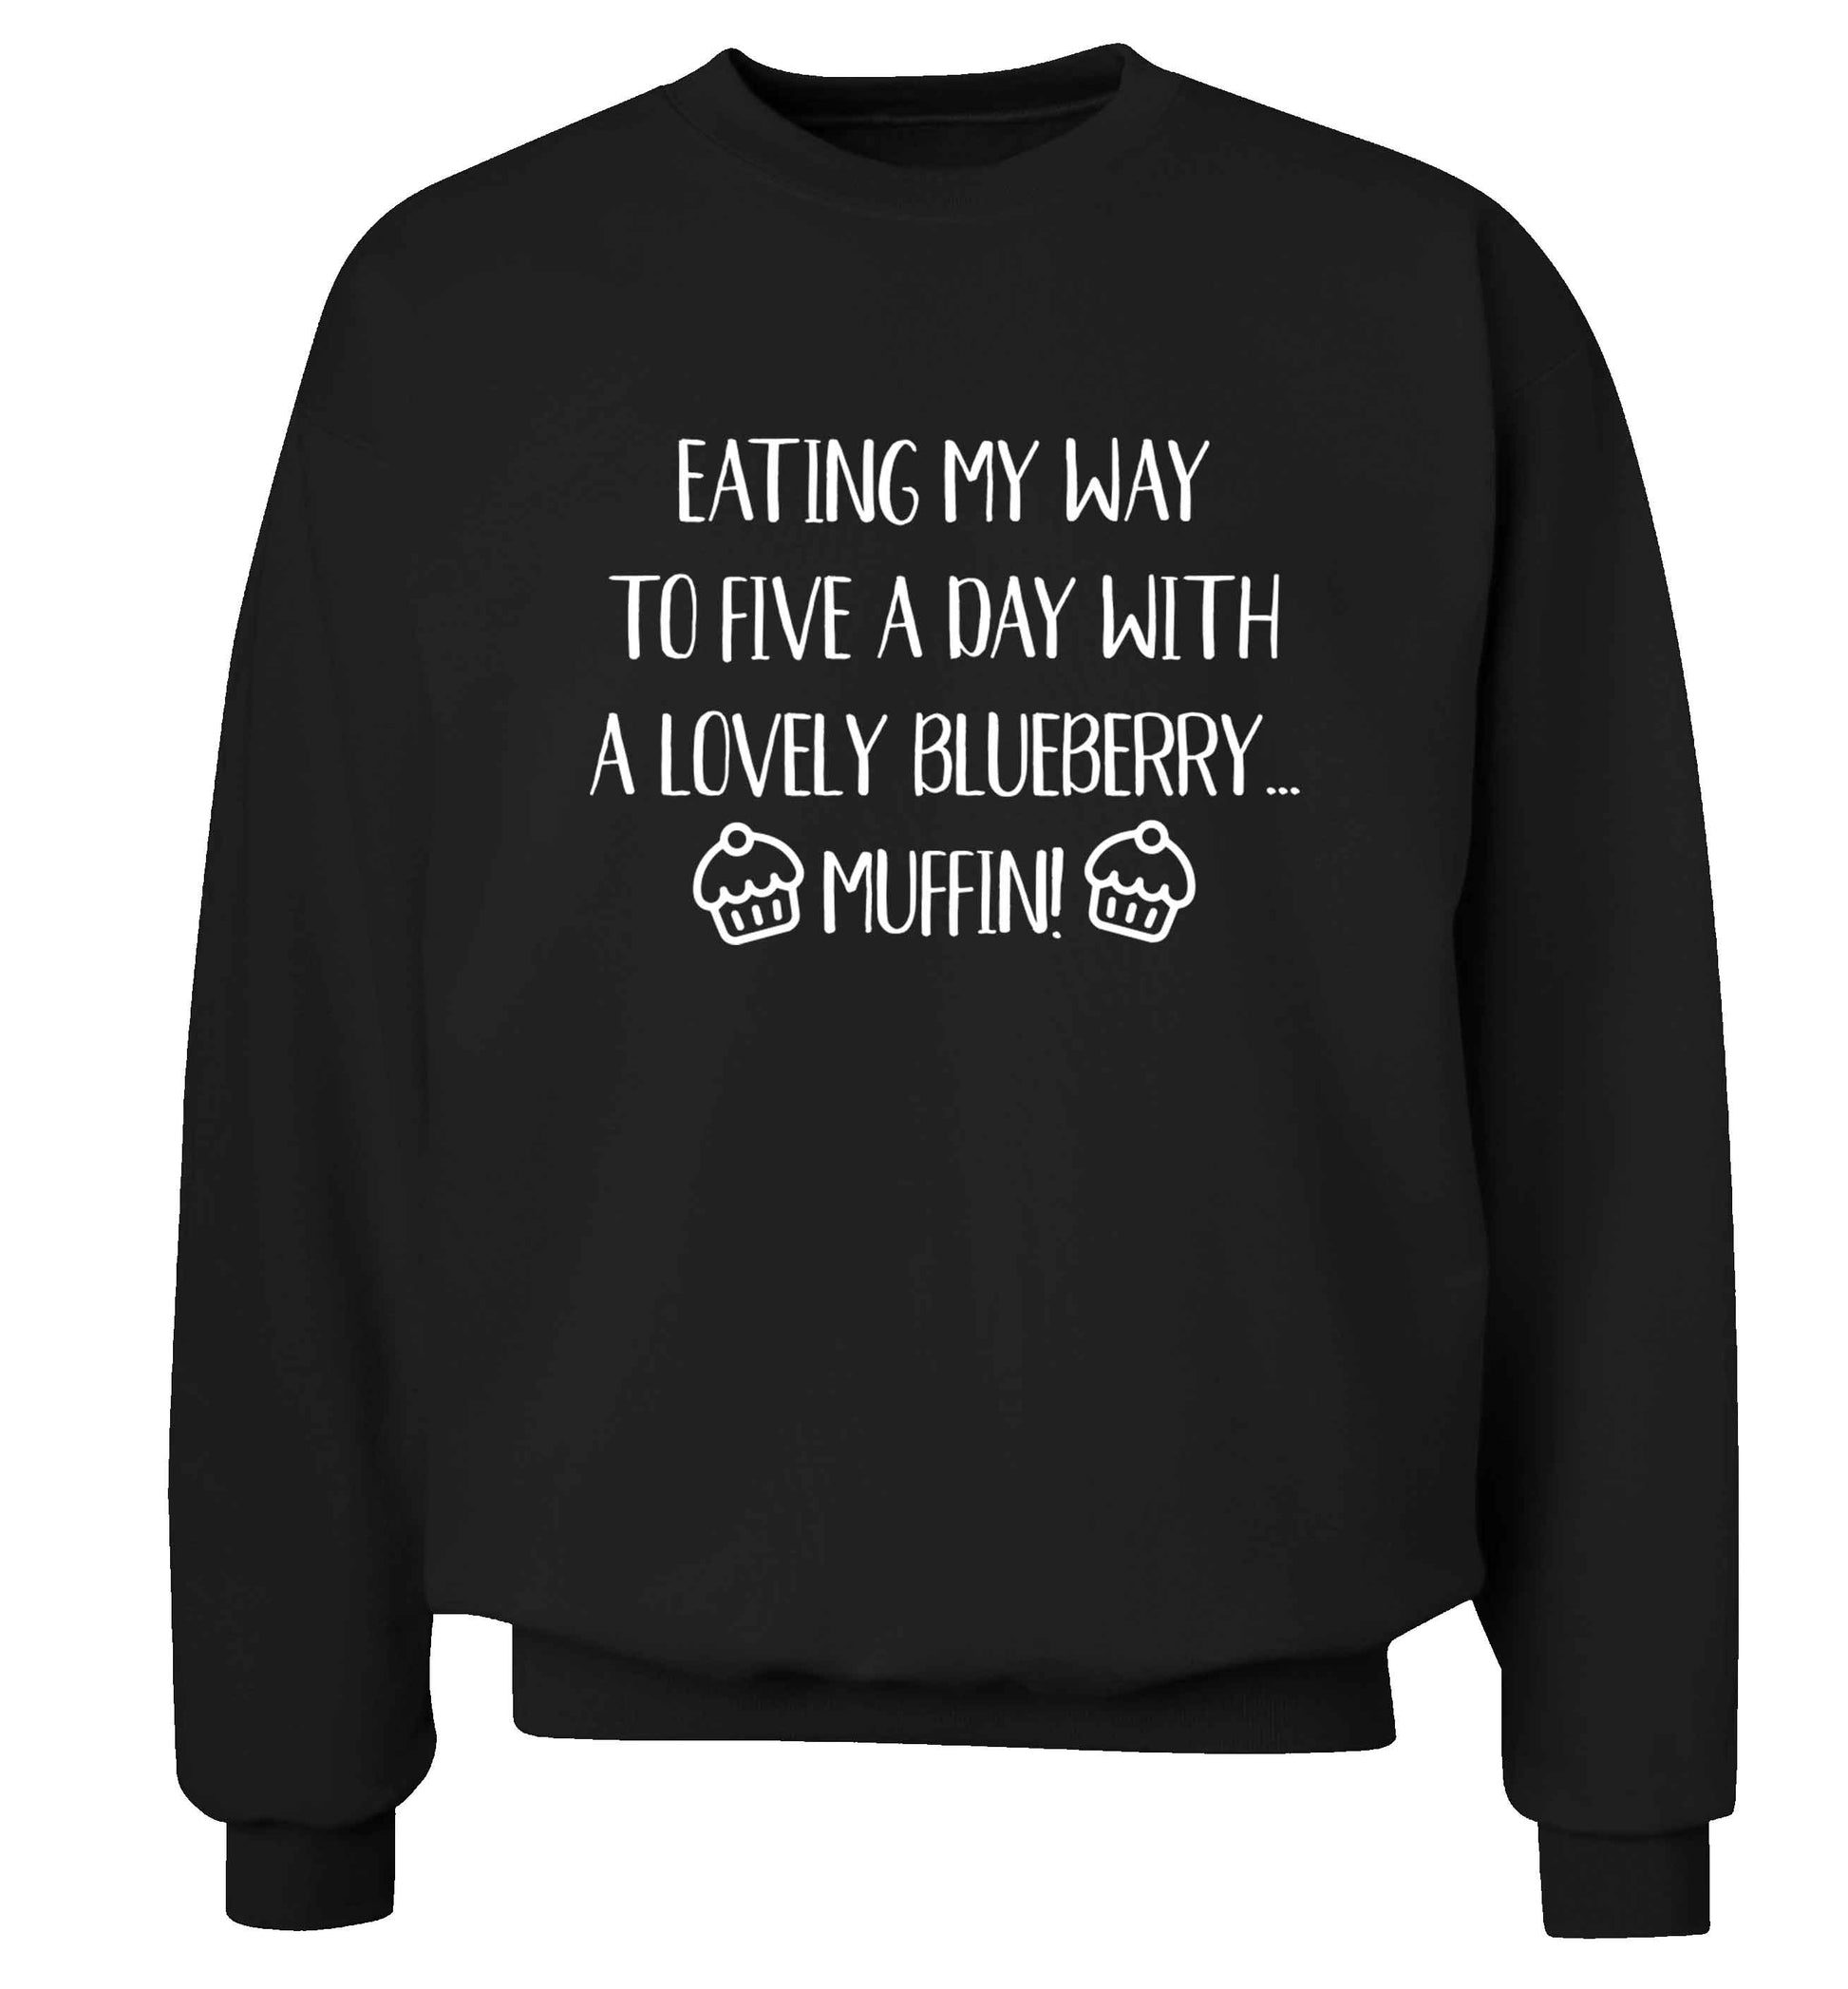 Eating my way to five a day with a lovely blueberry muffin Adult's unisex black Sweater 2XL